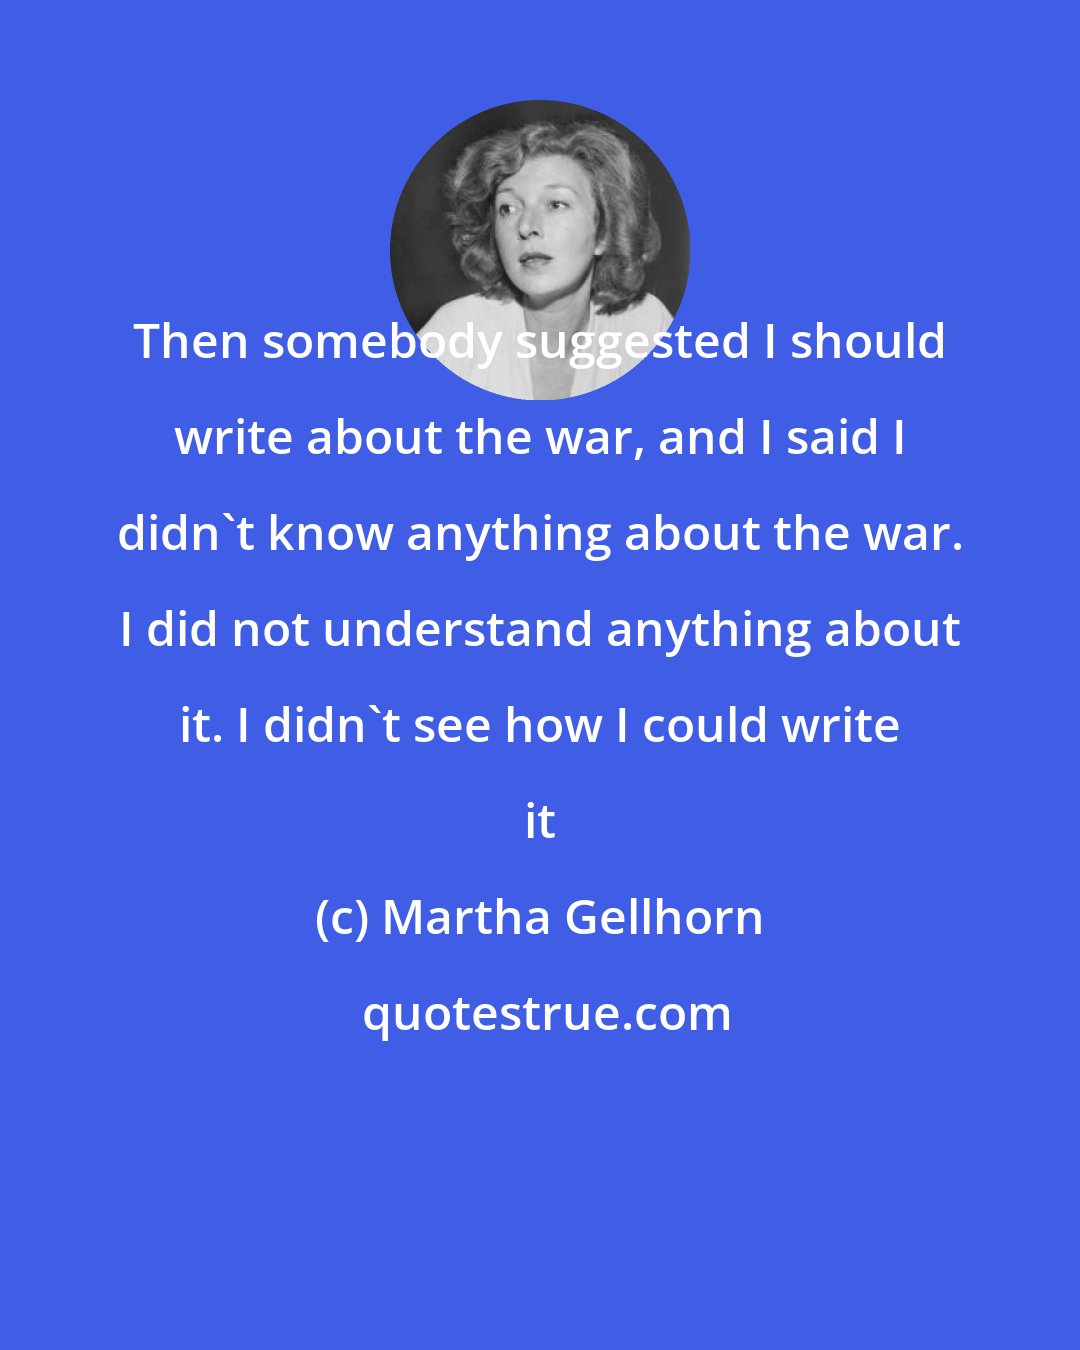 Martha Gellhorn: Then somebody suggested I should write about the war, and I said I didn't know anything about the war. I did not understand anything about it. I didn't see how I could write it